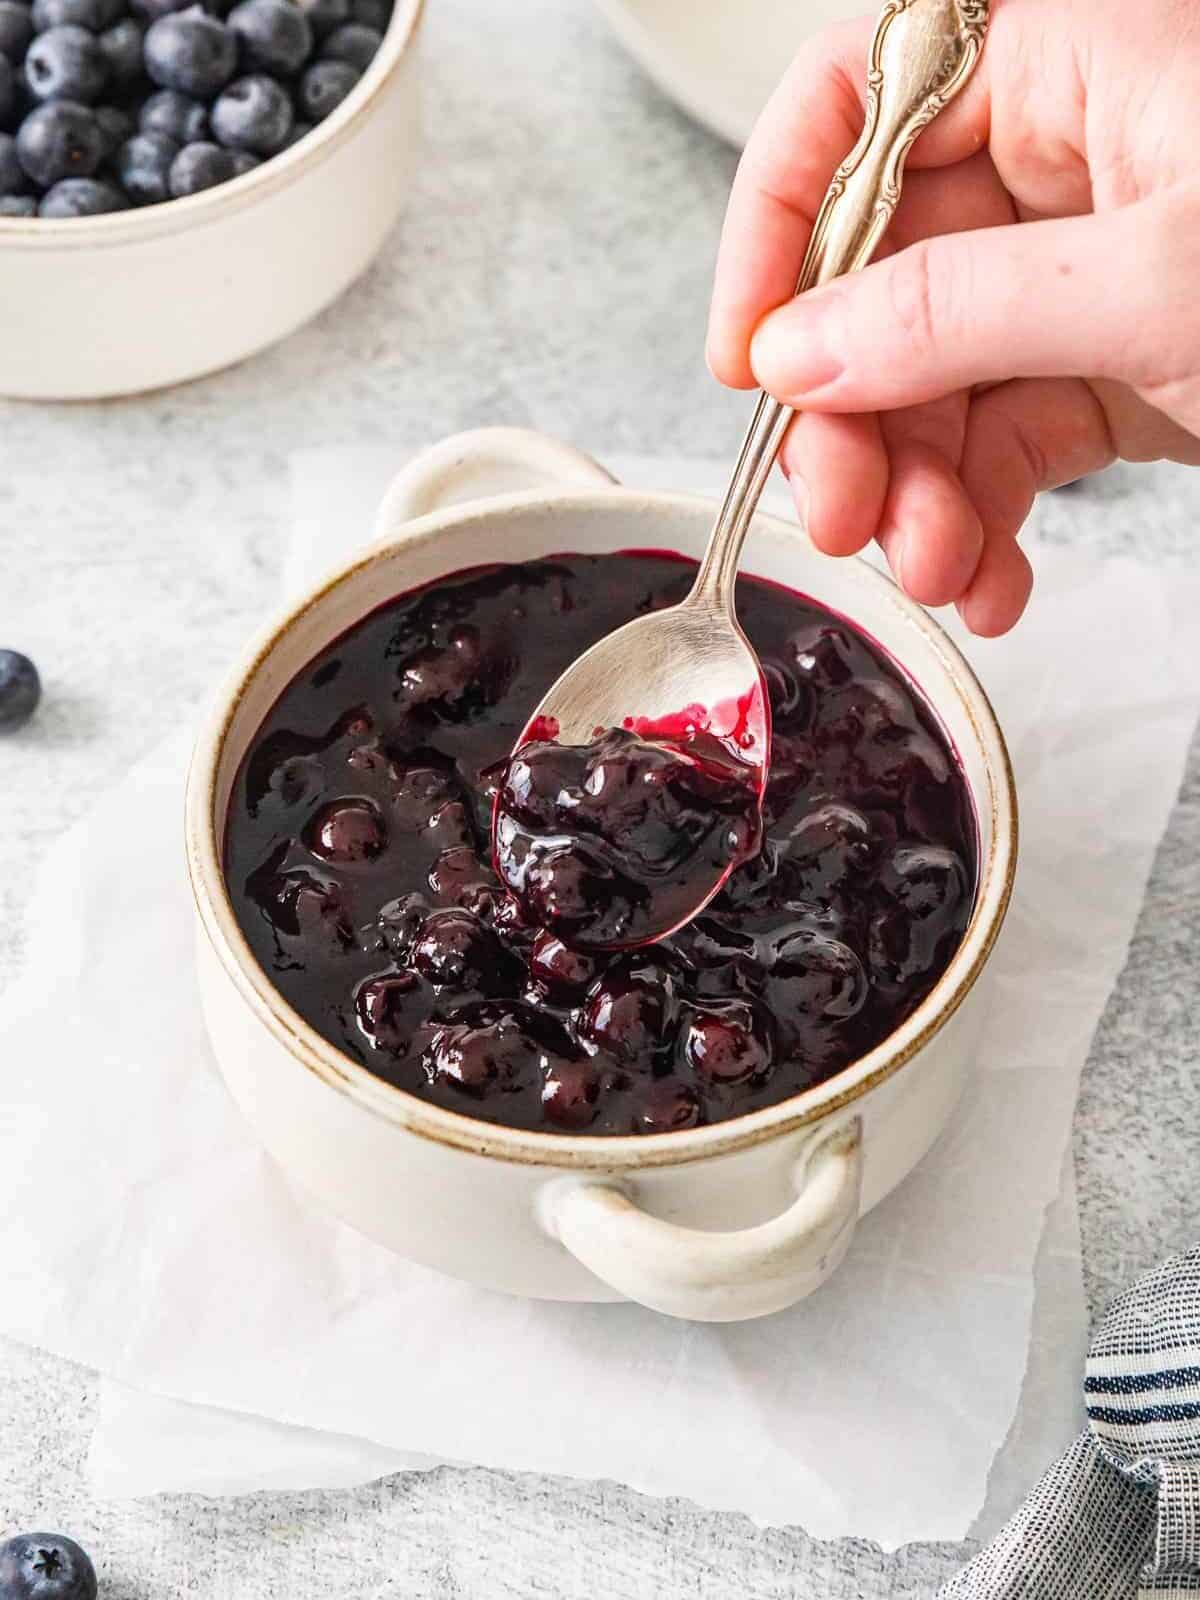 three-quarters view of a spoon scooping fresh blueberry sauce from a small white cocotte.